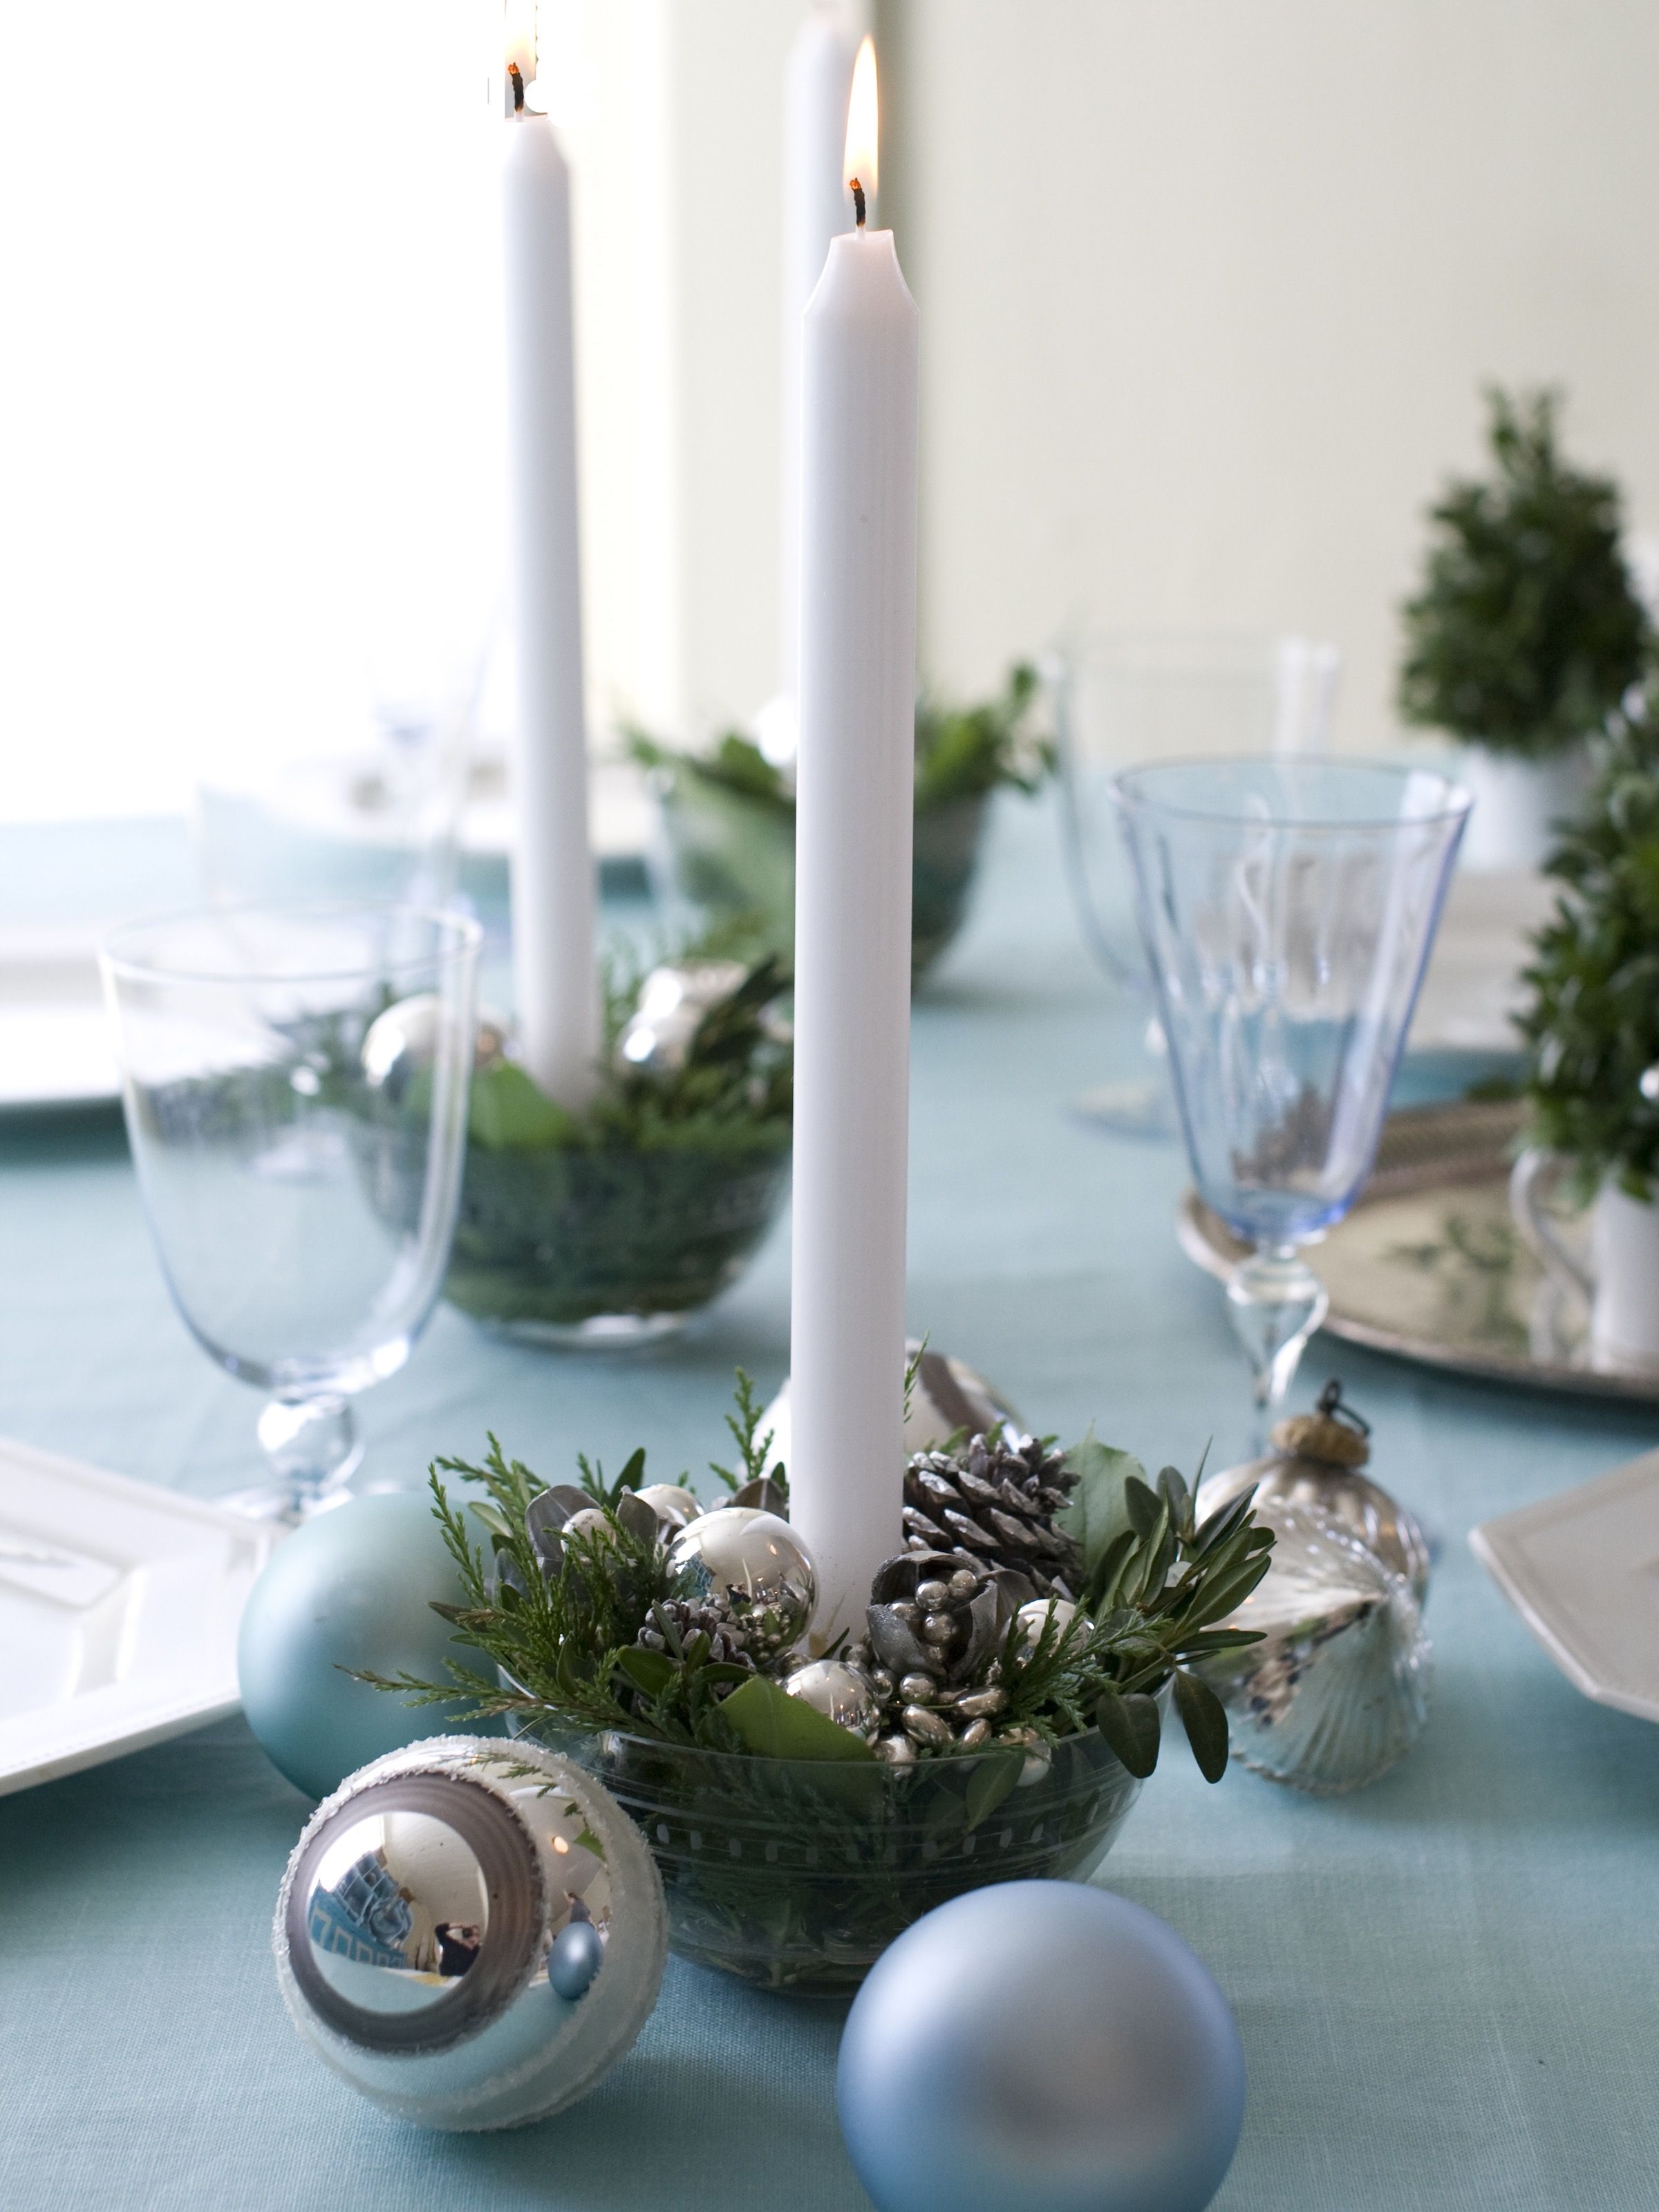 Rustic Candle Centerpieces With Evergreens And Ornaments (View 16 of 20)